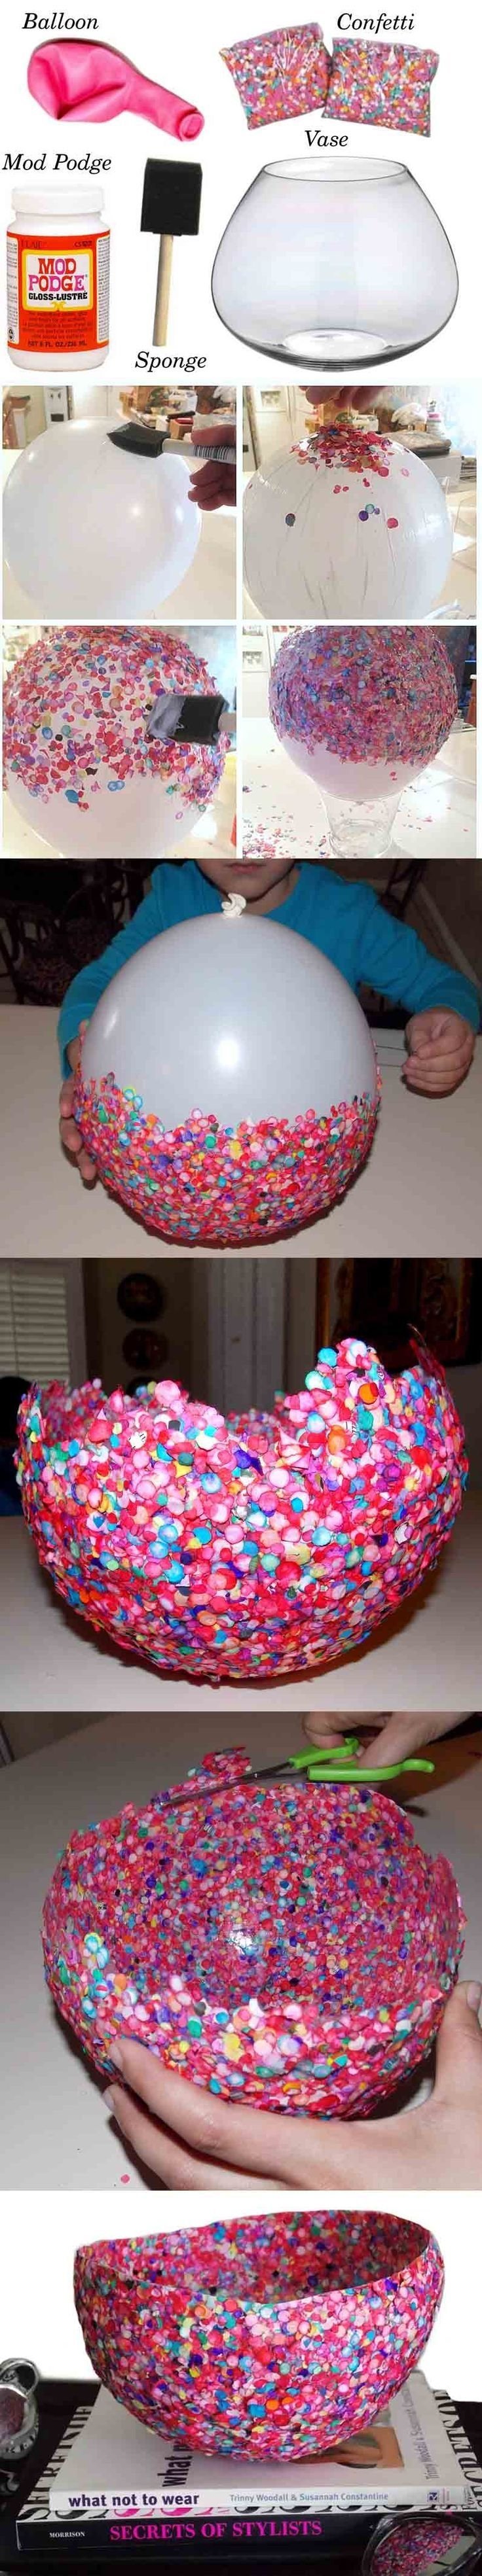 10 Awesome Cool Craft Ideas For Adults 388 best craft ideas recipes images on pinterest creative ideas 2022